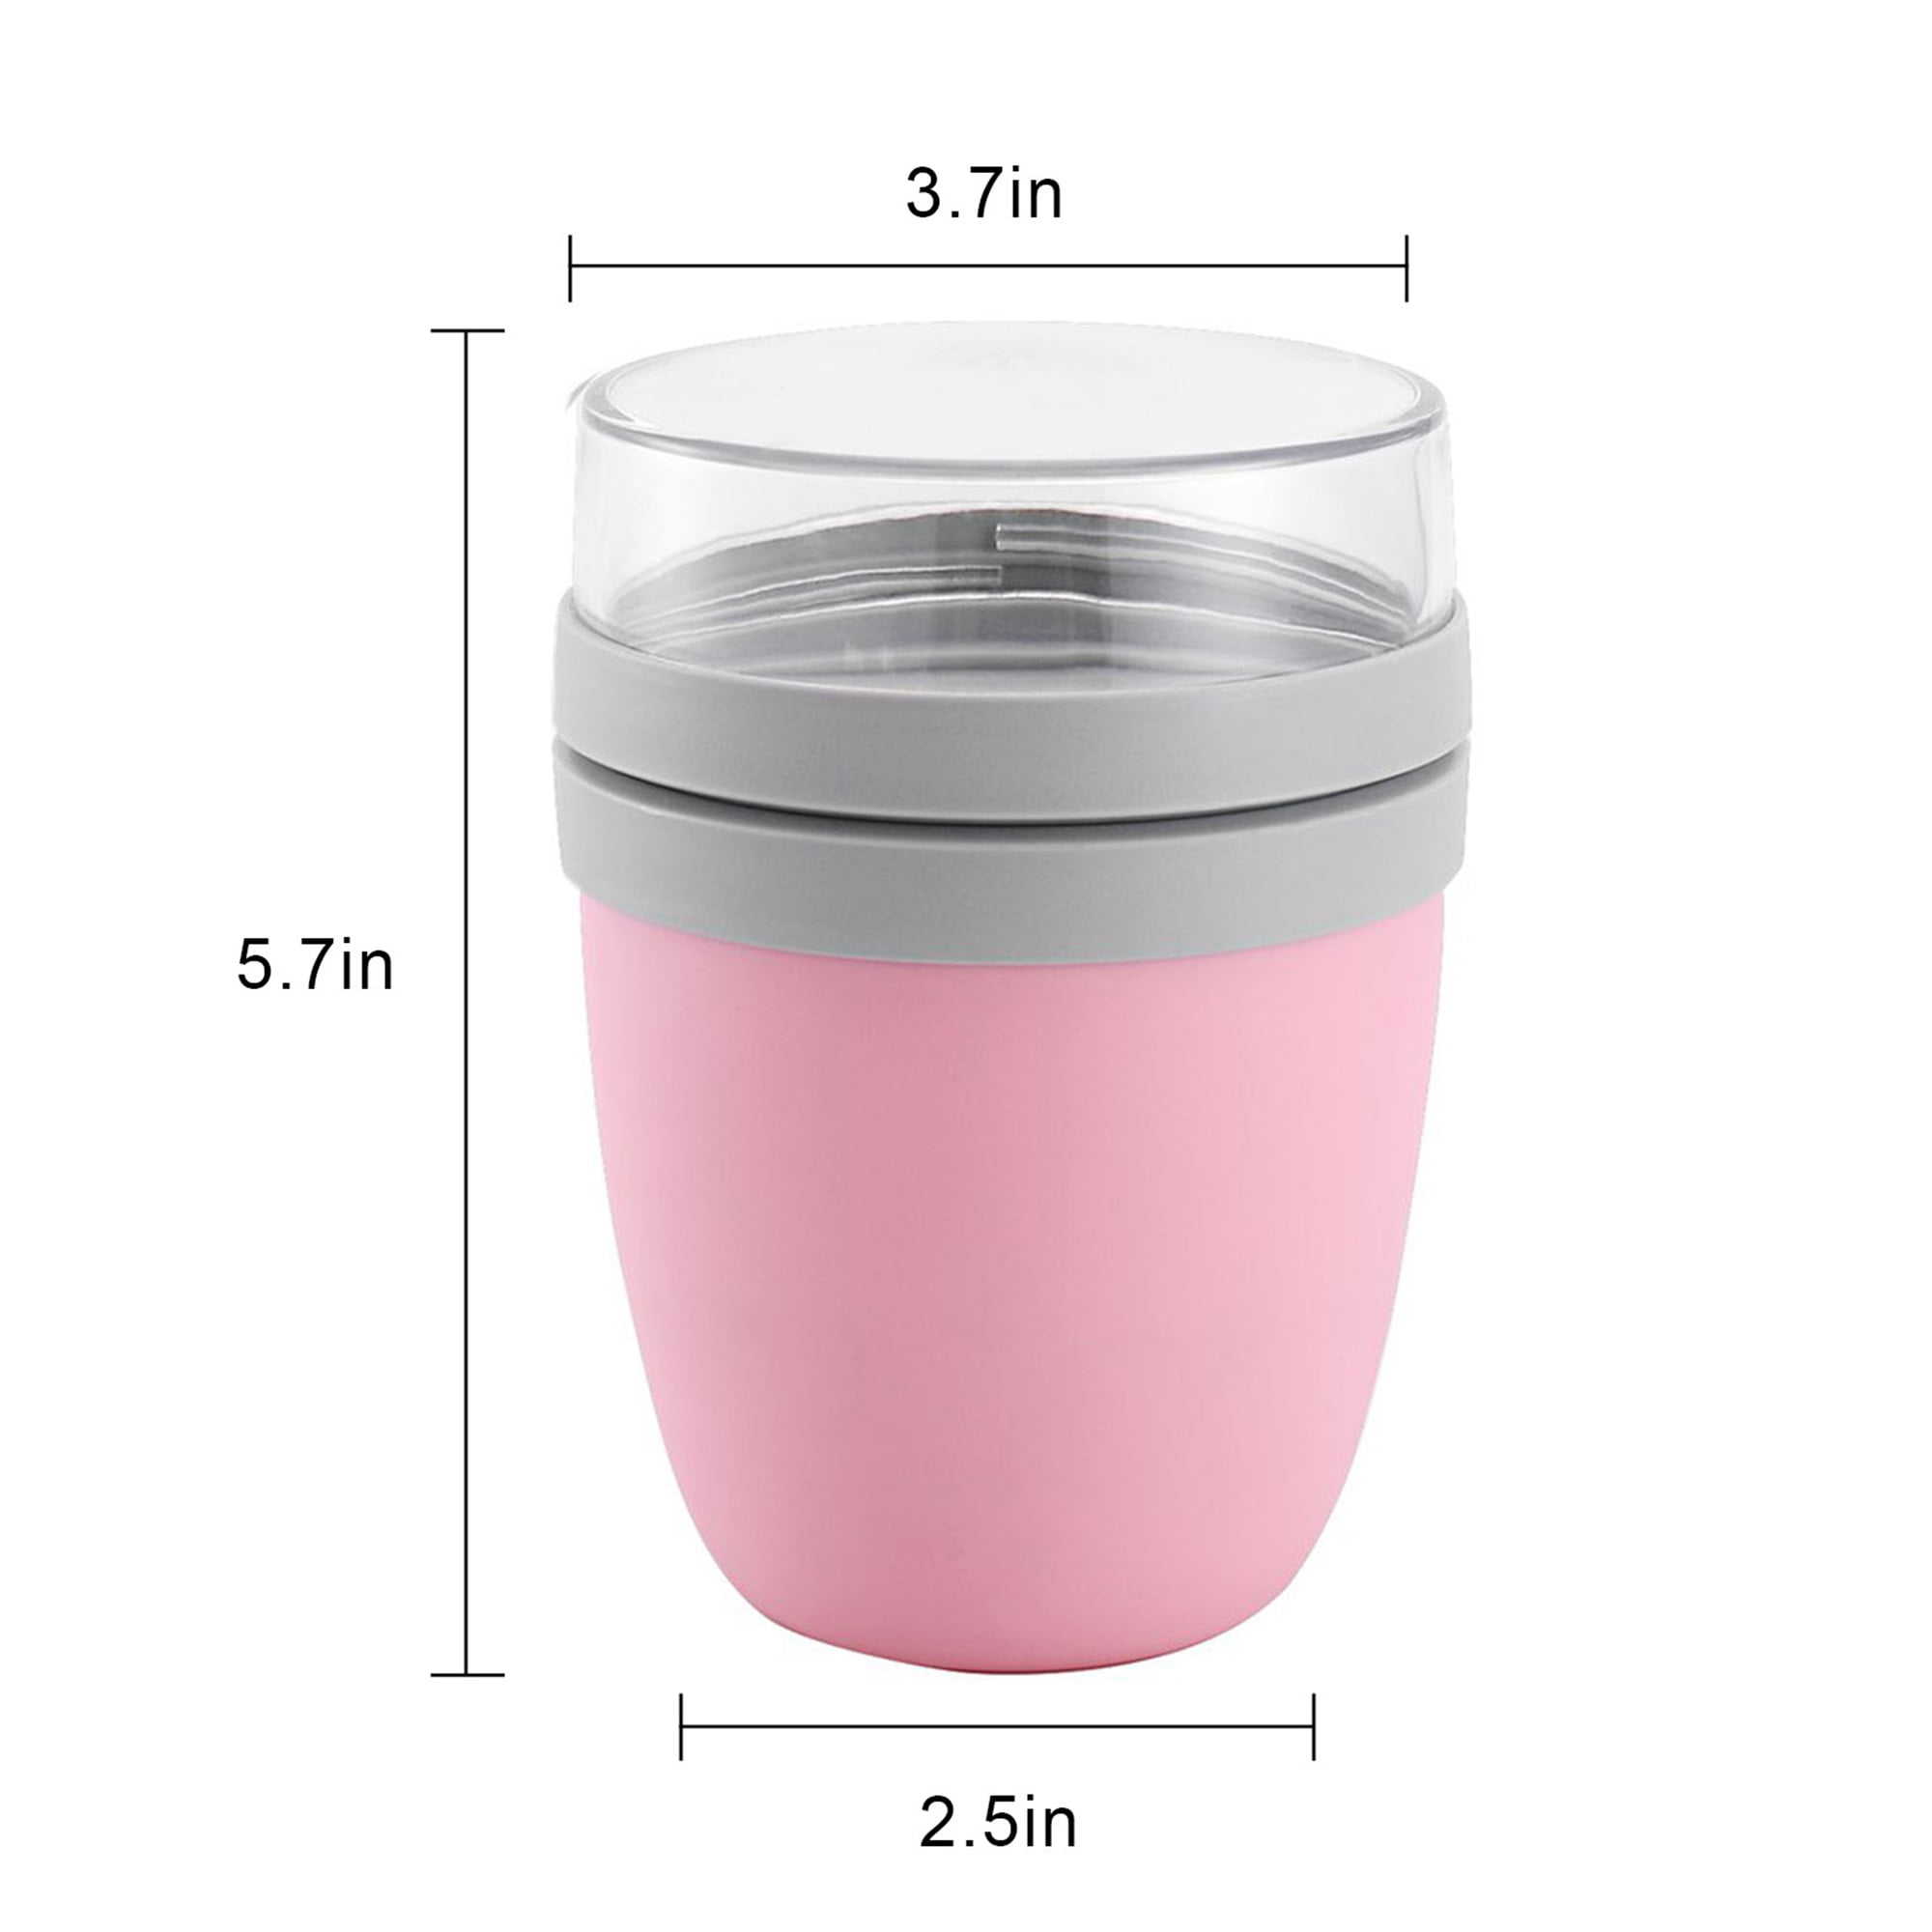 Thermo Mug Yoghurt Container blue Trend Ario Cereal 2 Go Cereal Cup to Go with Spoon,Travel Mug with Insulated Milk Cooling Compartment 